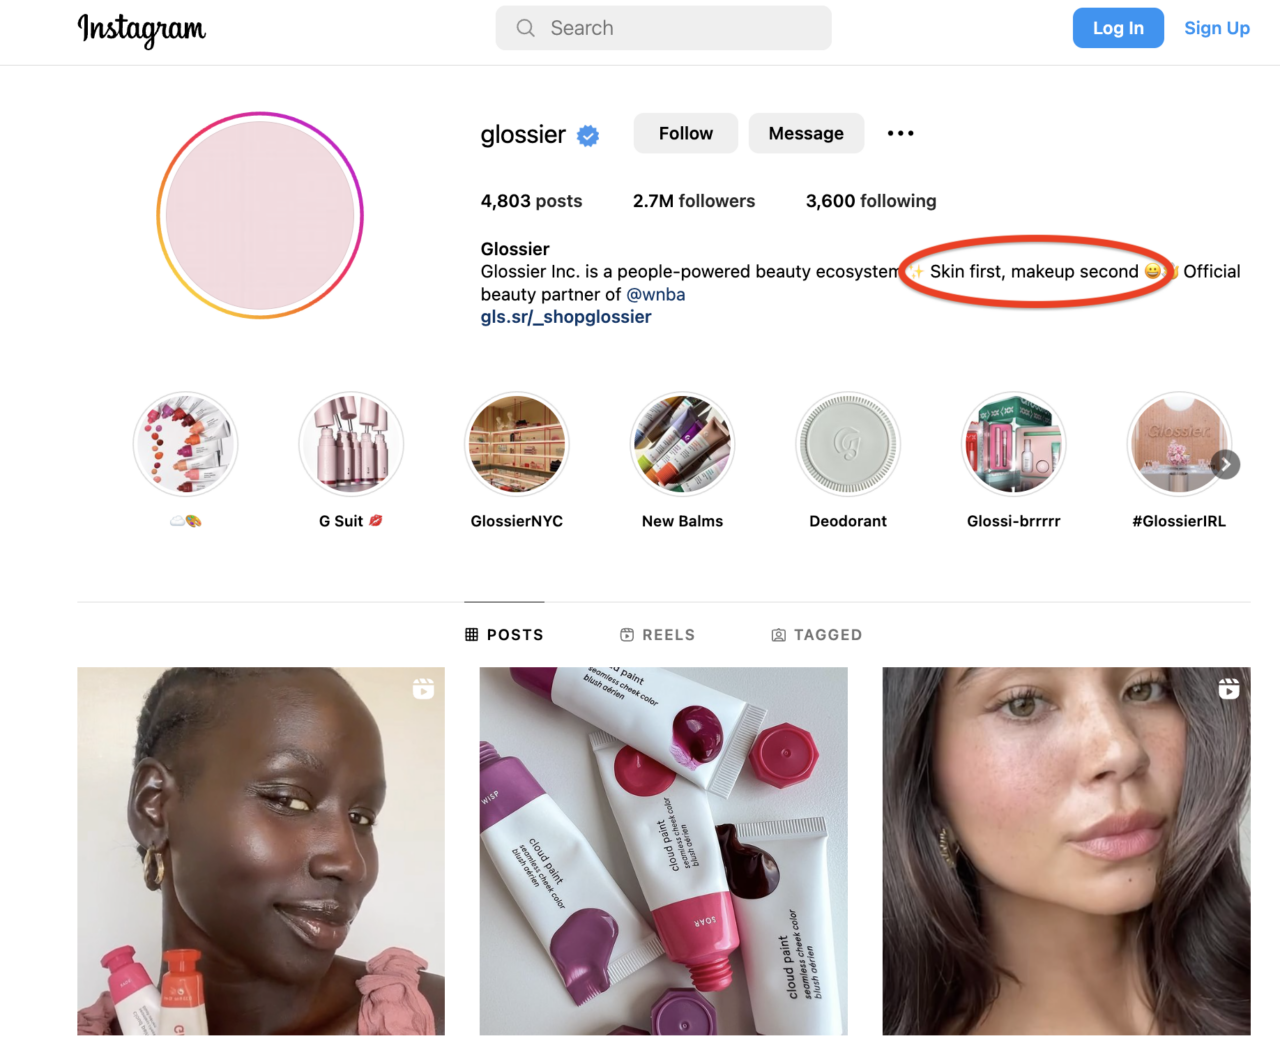 Glossier makeup brand Instagram page